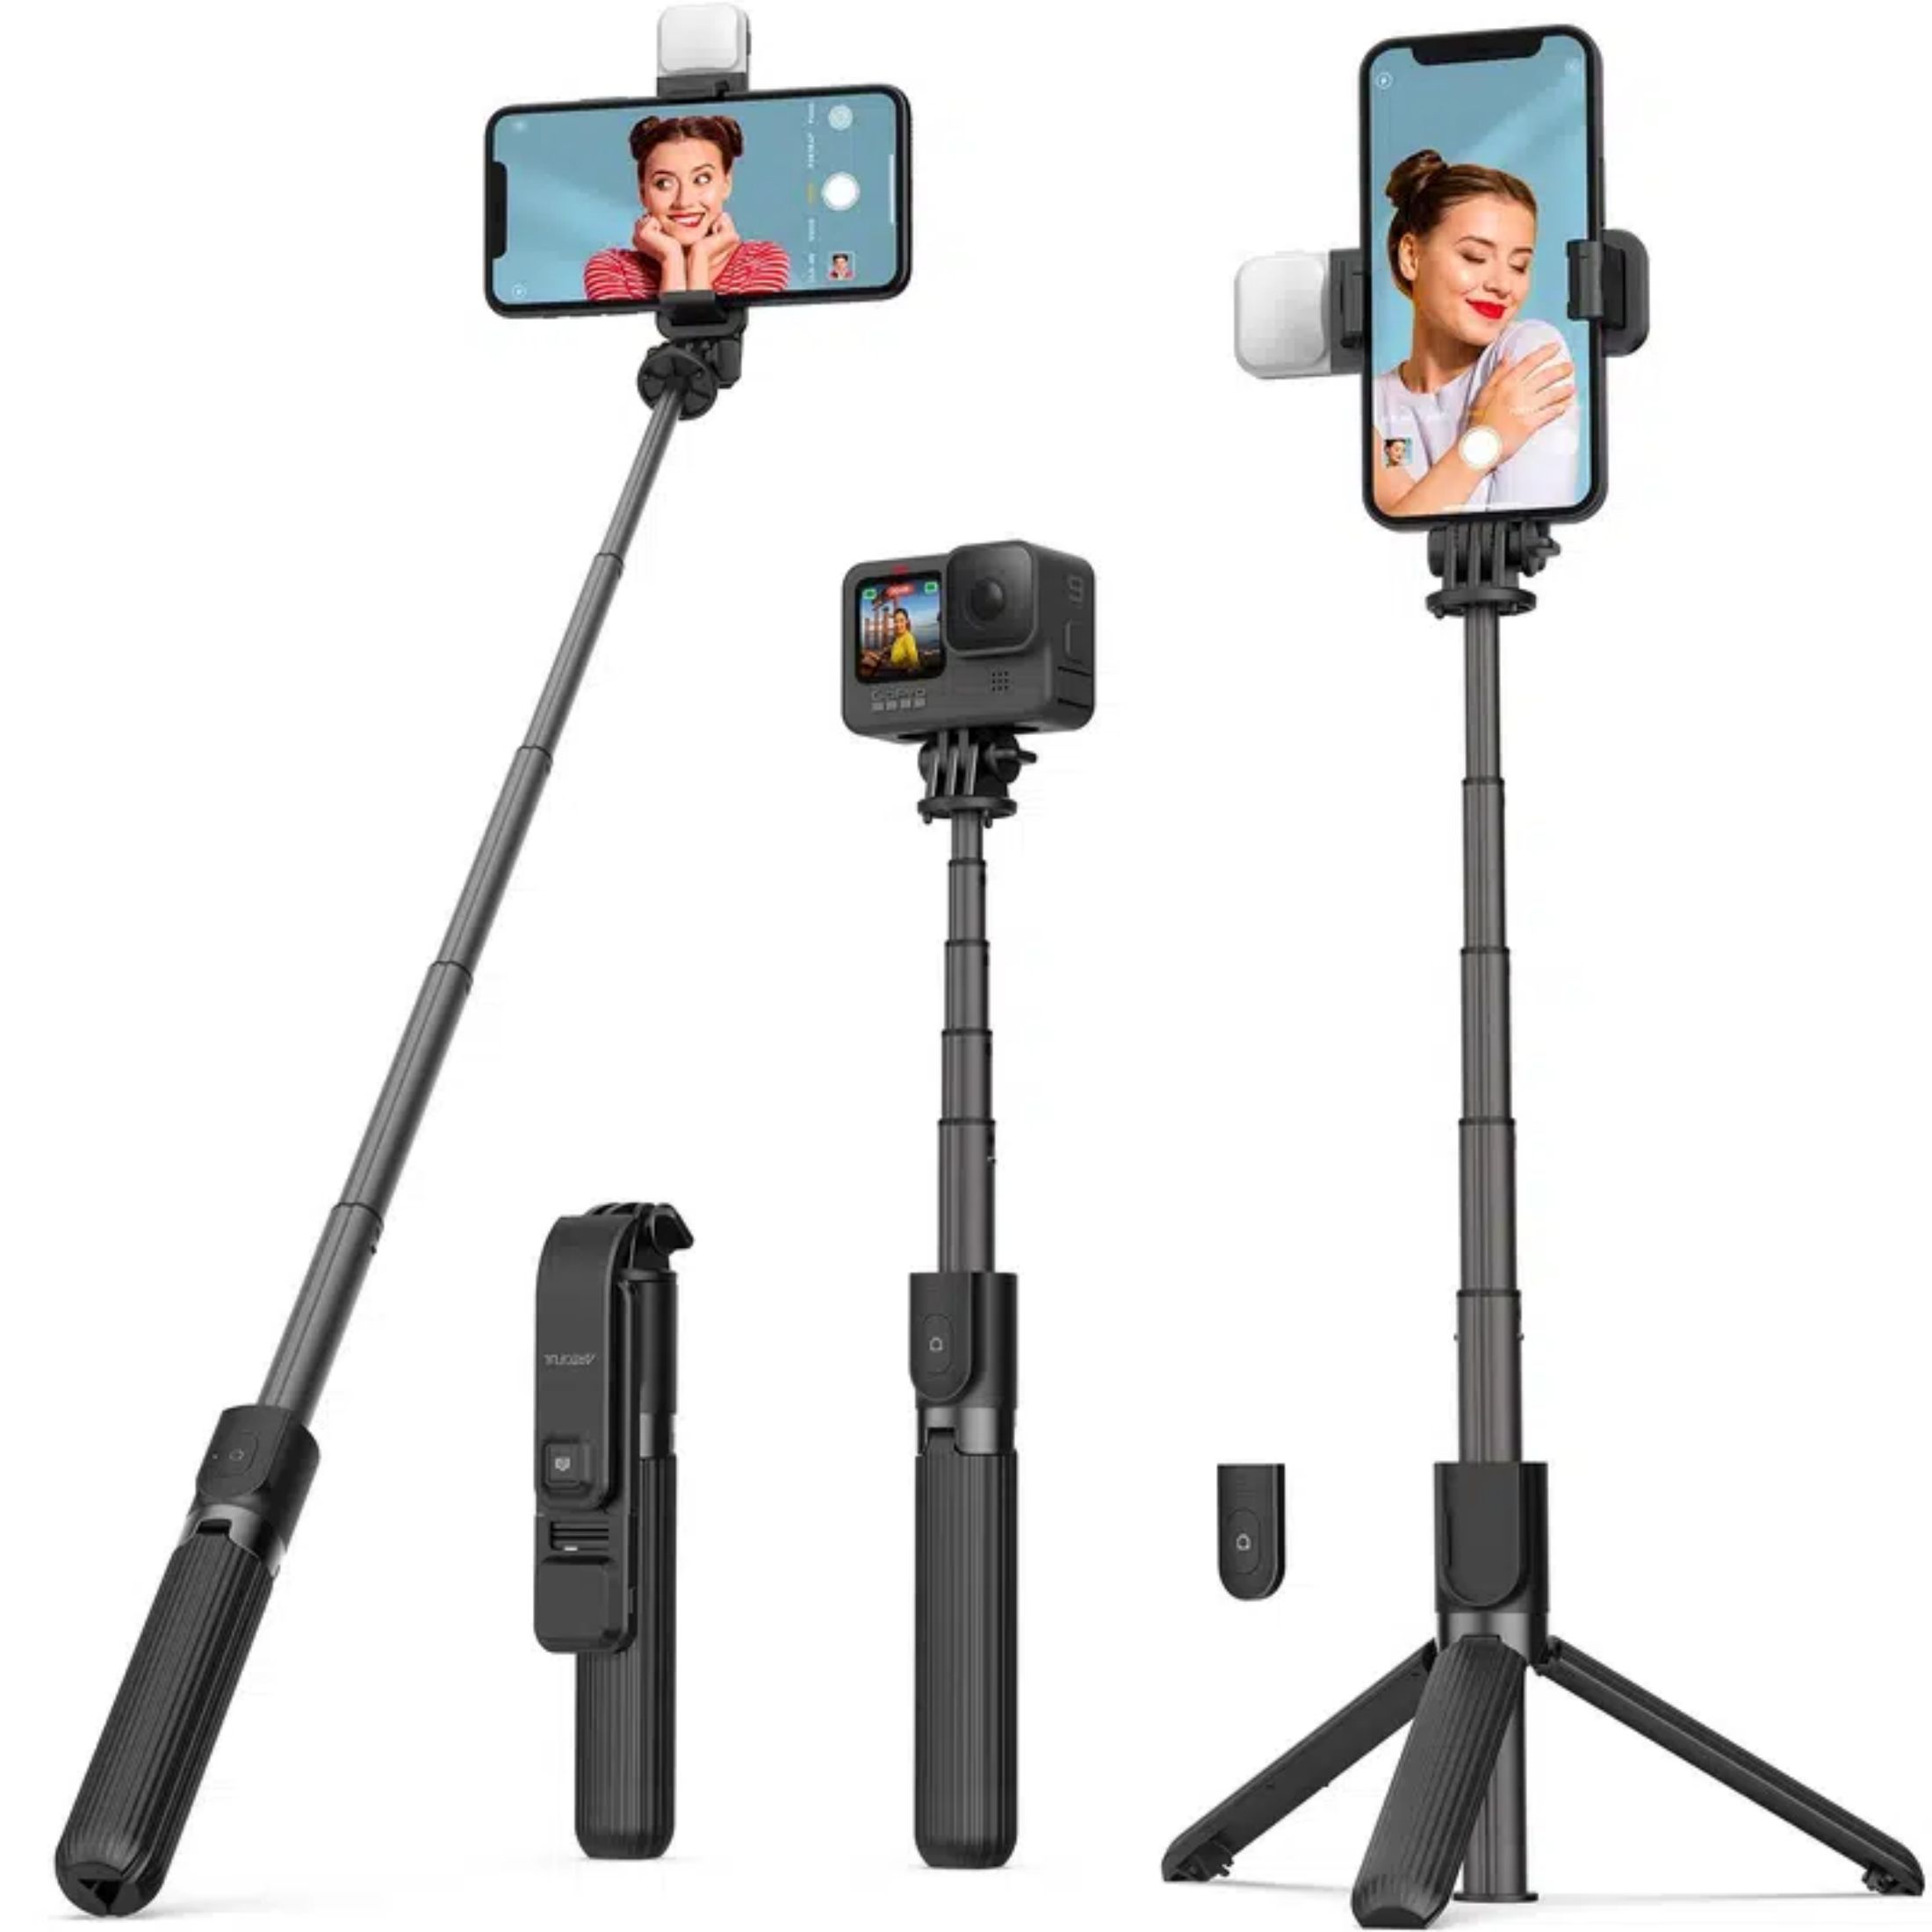 Aluminum Alloy Wireless Tripod Selfie Stick Phone Tripod With Wireless Shutter Compatible For IPhone 14 13 12 11 Pro Xs Max Xr X 8 7 6 Plus, Android Samsung Smartphone Walmart.com